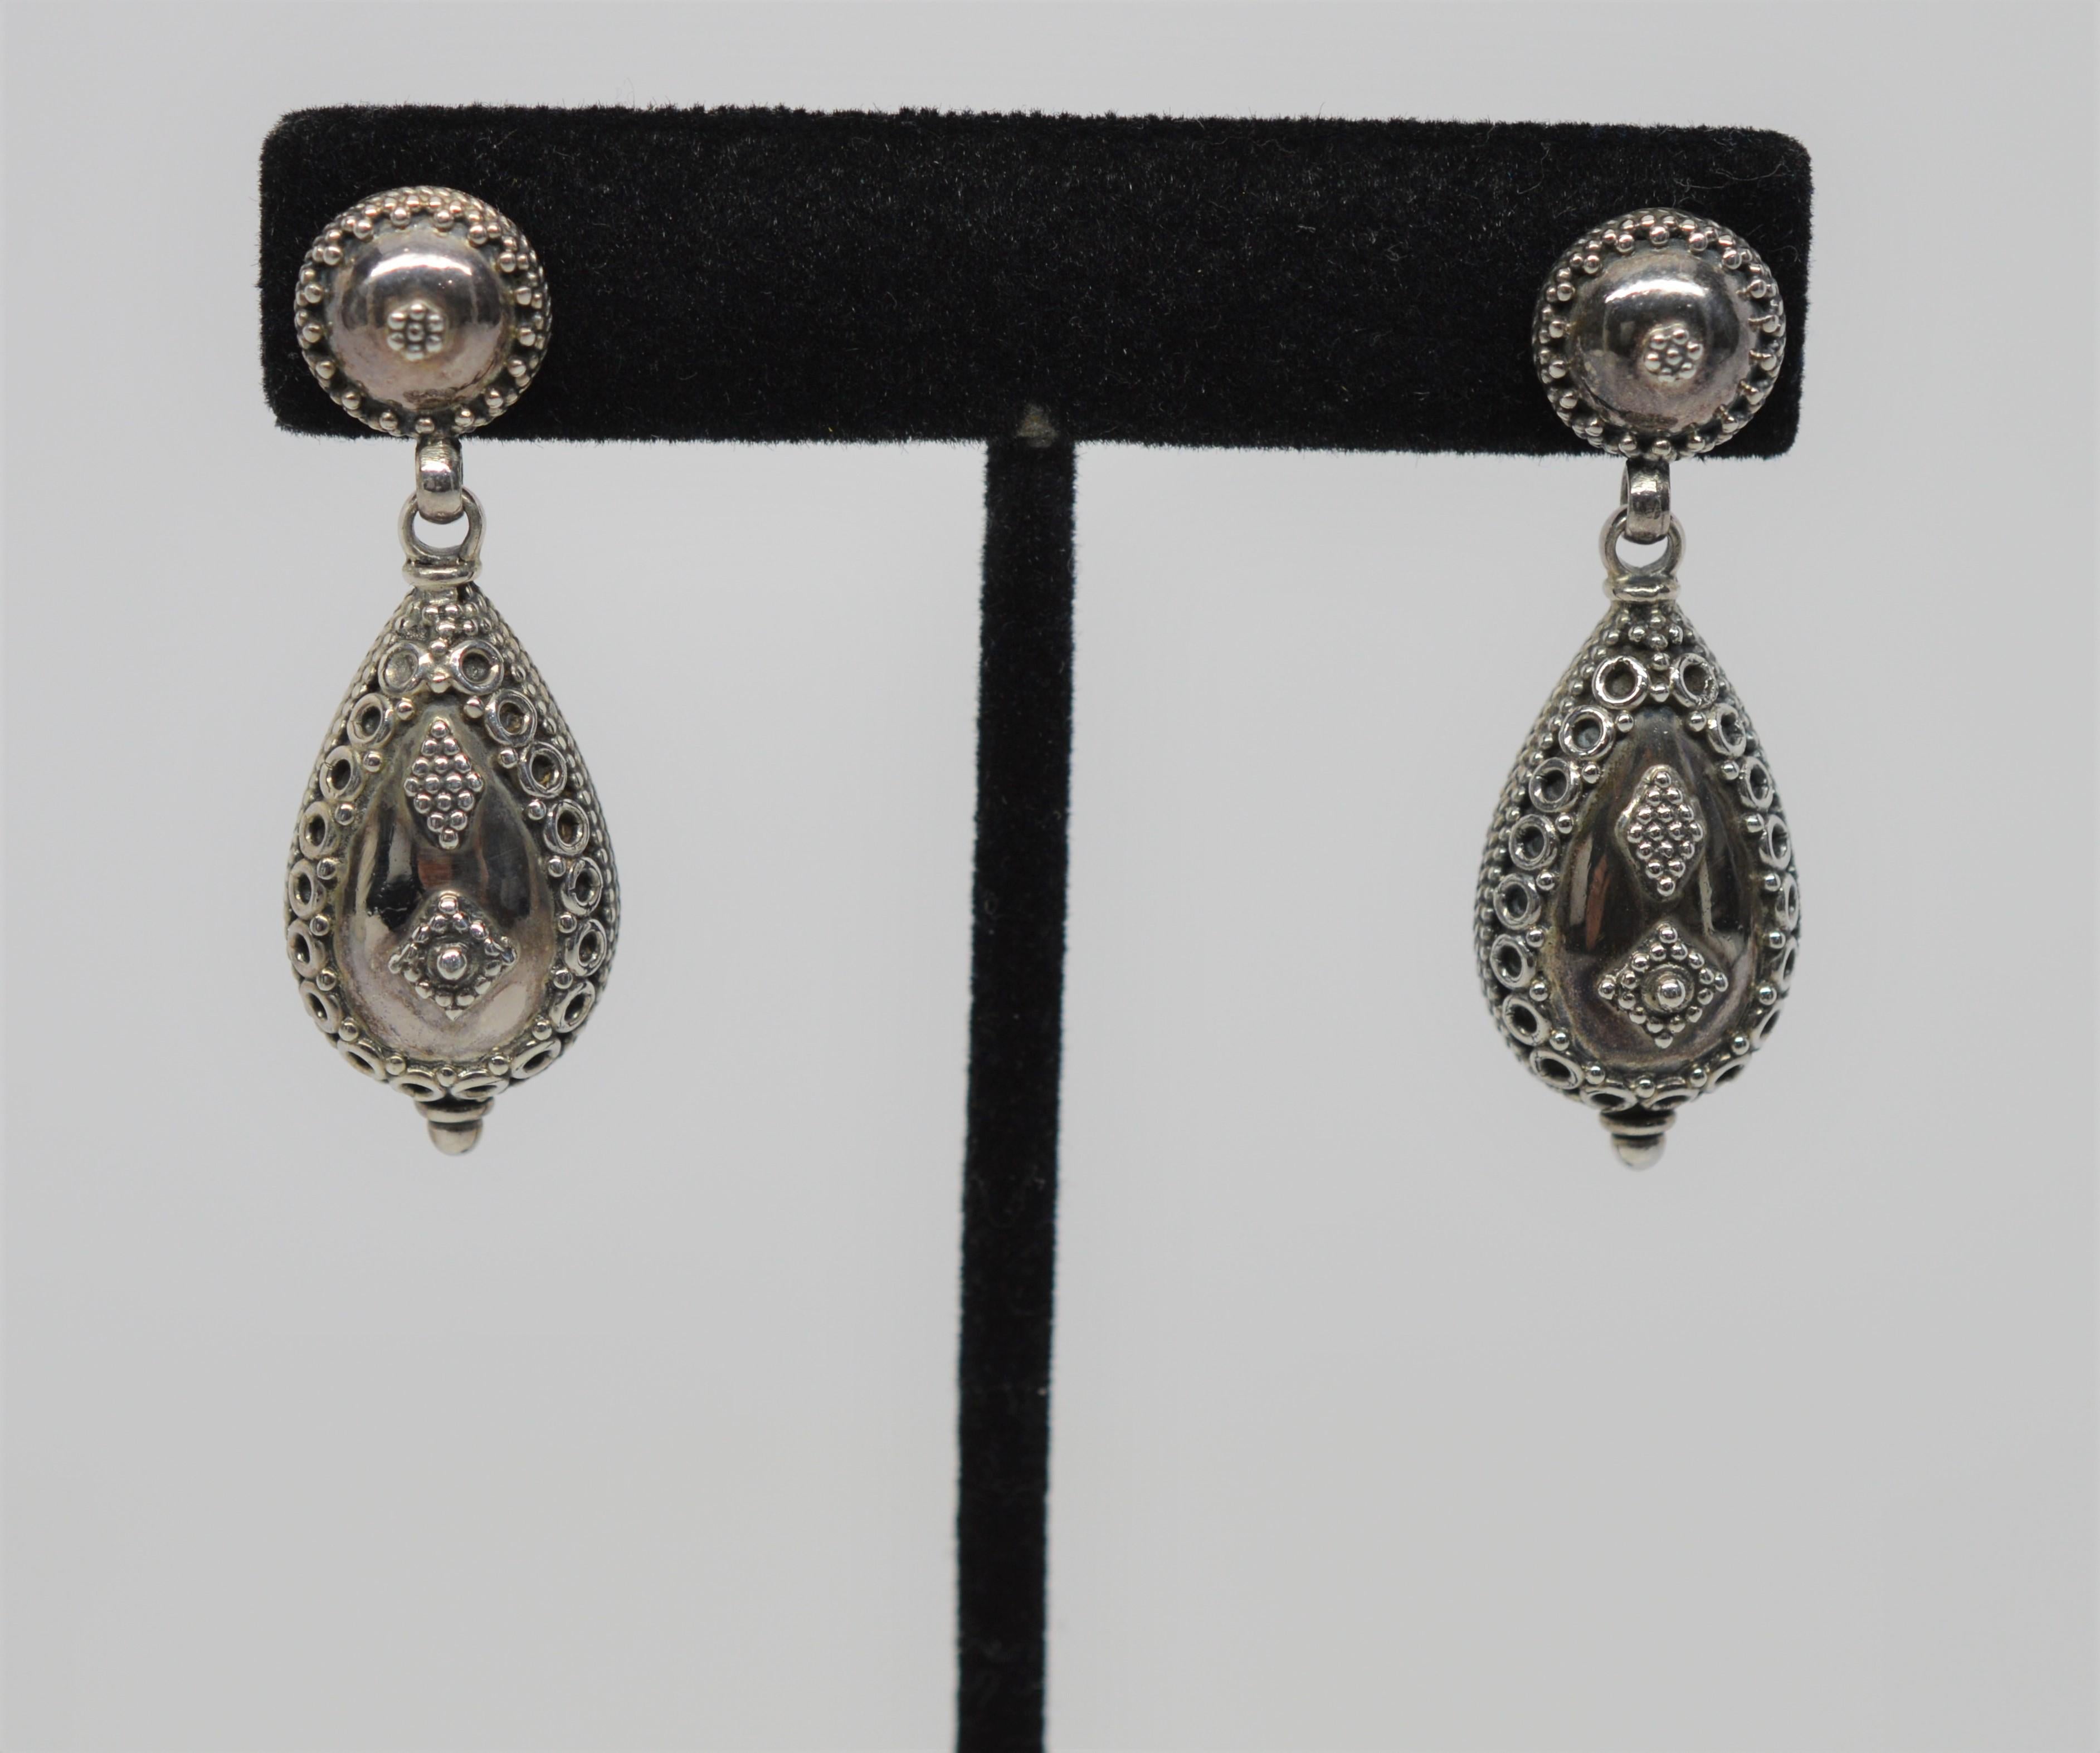 Crafted Sterling Silver from the sub-continent of India, these Tear Drop Puff Charm Dangle Earrings are adorned with ornate detail in Silver.  
Made with a push back, secured to a decorated post. The Sterling Silver Puff Charm dangles 1-1/4 inch.